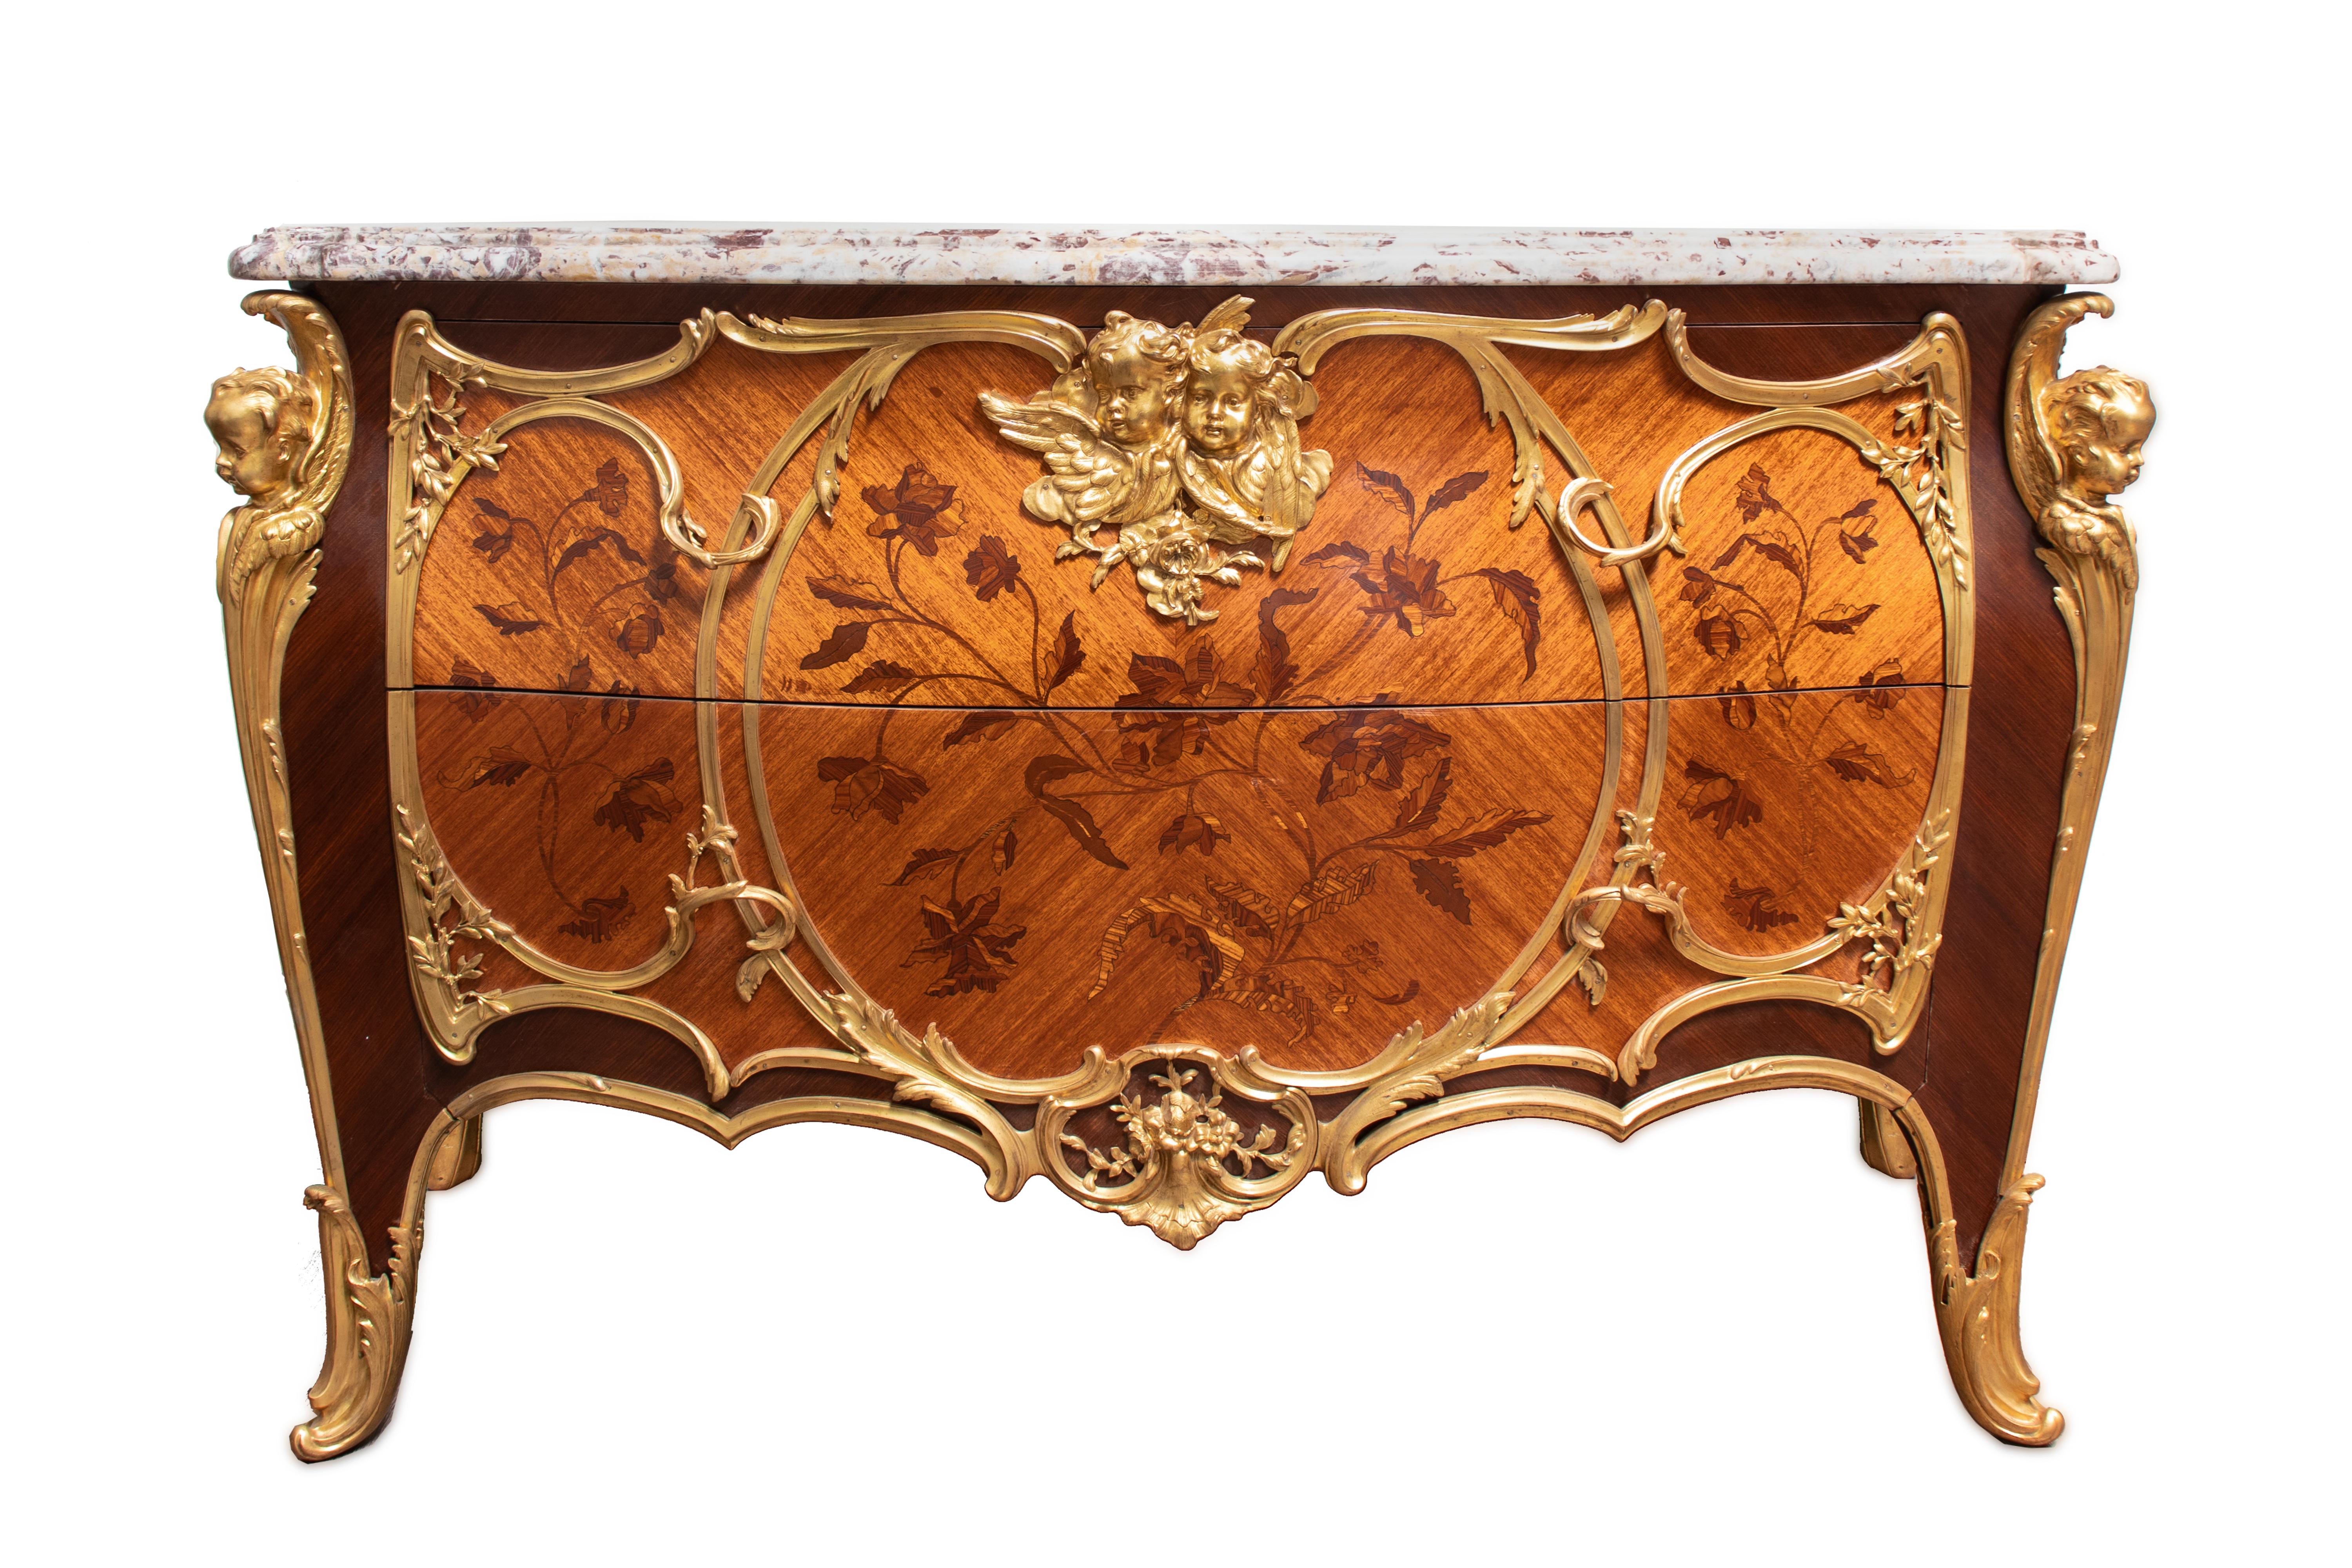 Hand-Carved Pair of French Commodes in Louis XV style with Ormolu Mounts and Marquetry For Sale